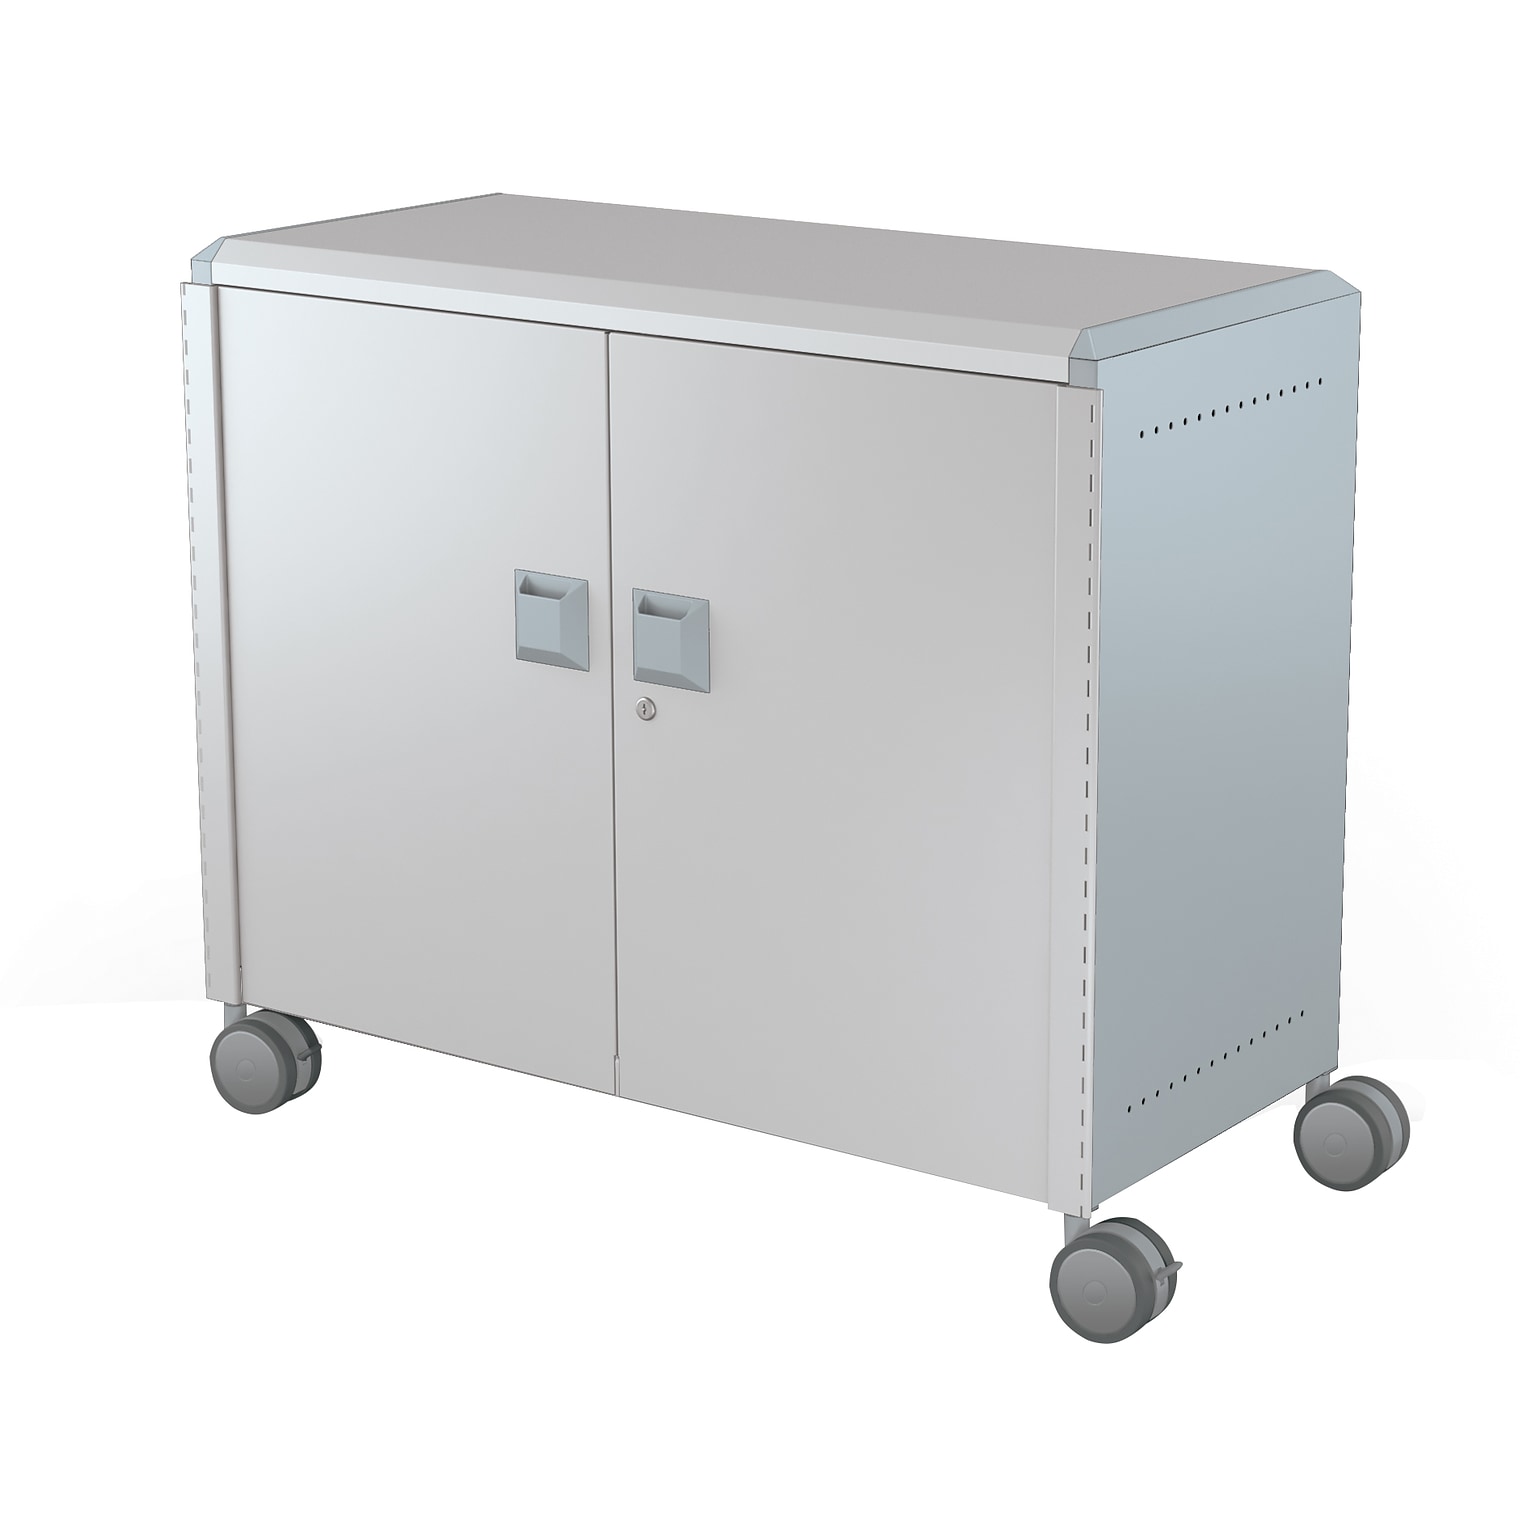 MooreCo Compass Maxi H2 Mobile 9-Section Storage Cabinet, 36.13H x 41.88W x 19.13D, Platinum/Cool Gray Metal (B3A1B2E1X0)